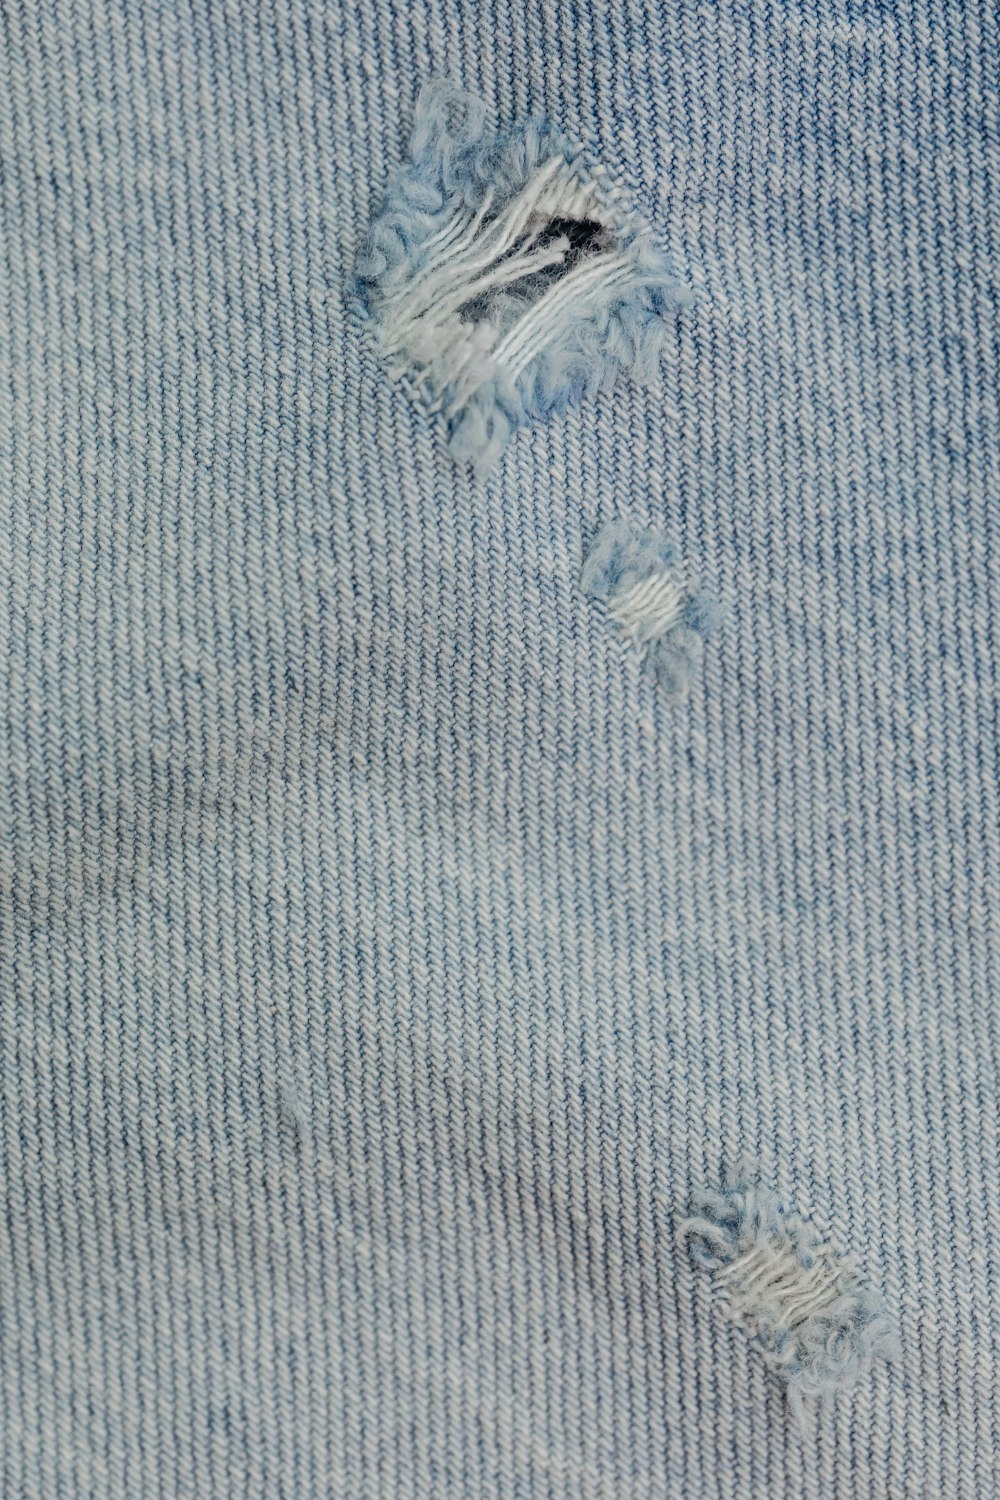 a close up of a piece of clothing with holes in it